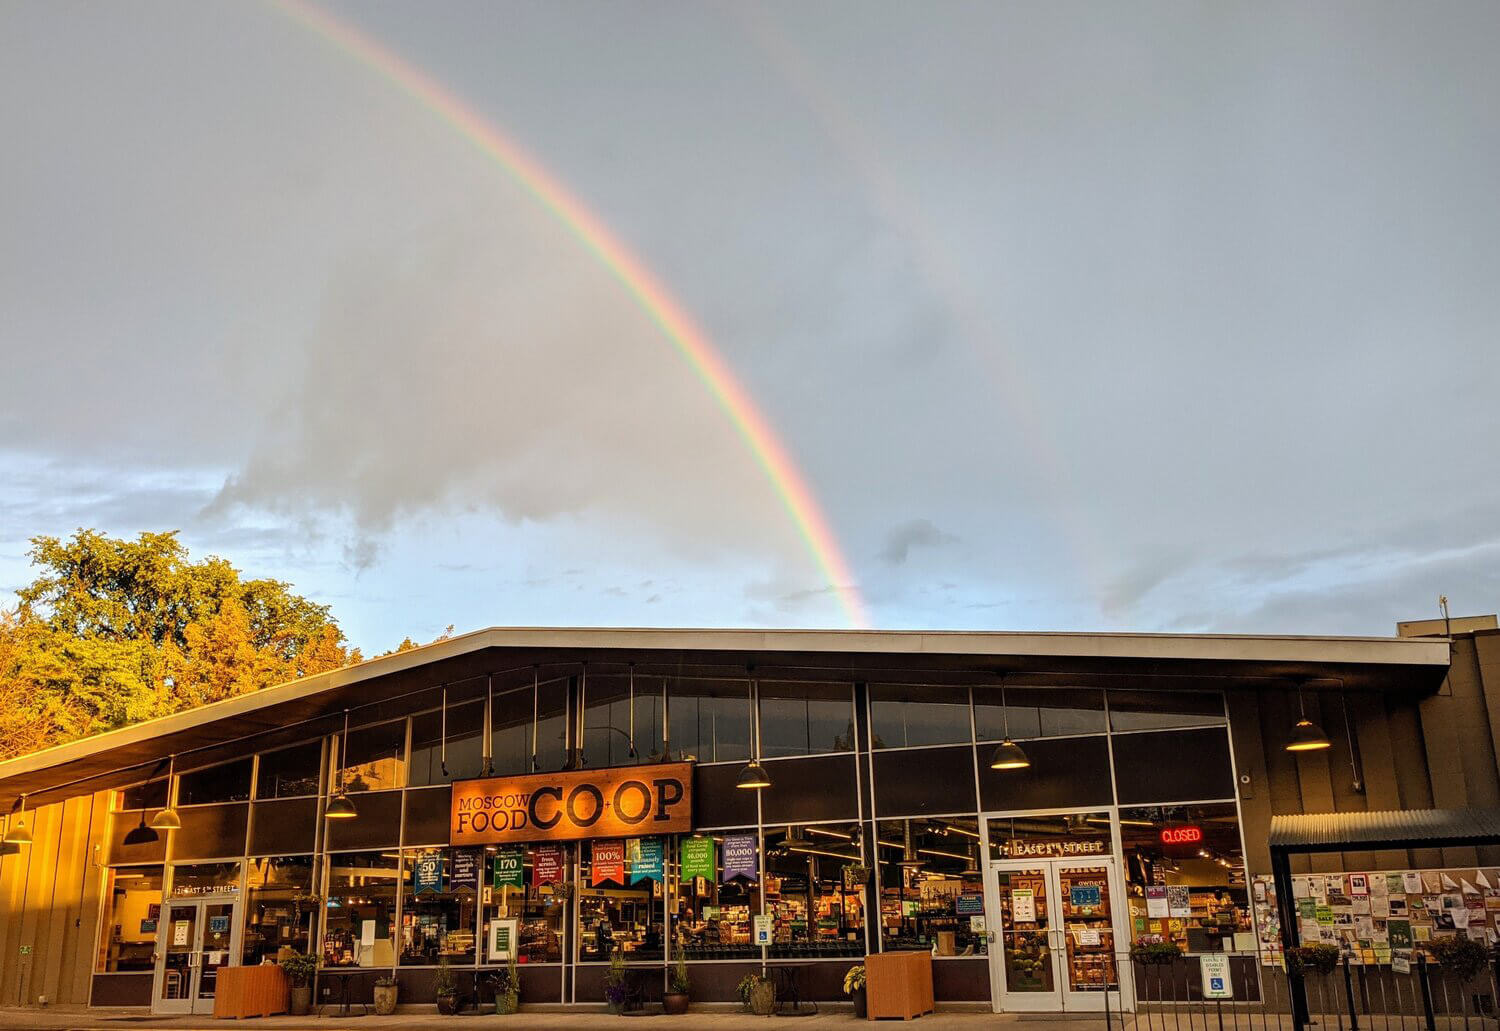 Moscow Food Co-Op in Moscow, Idaho